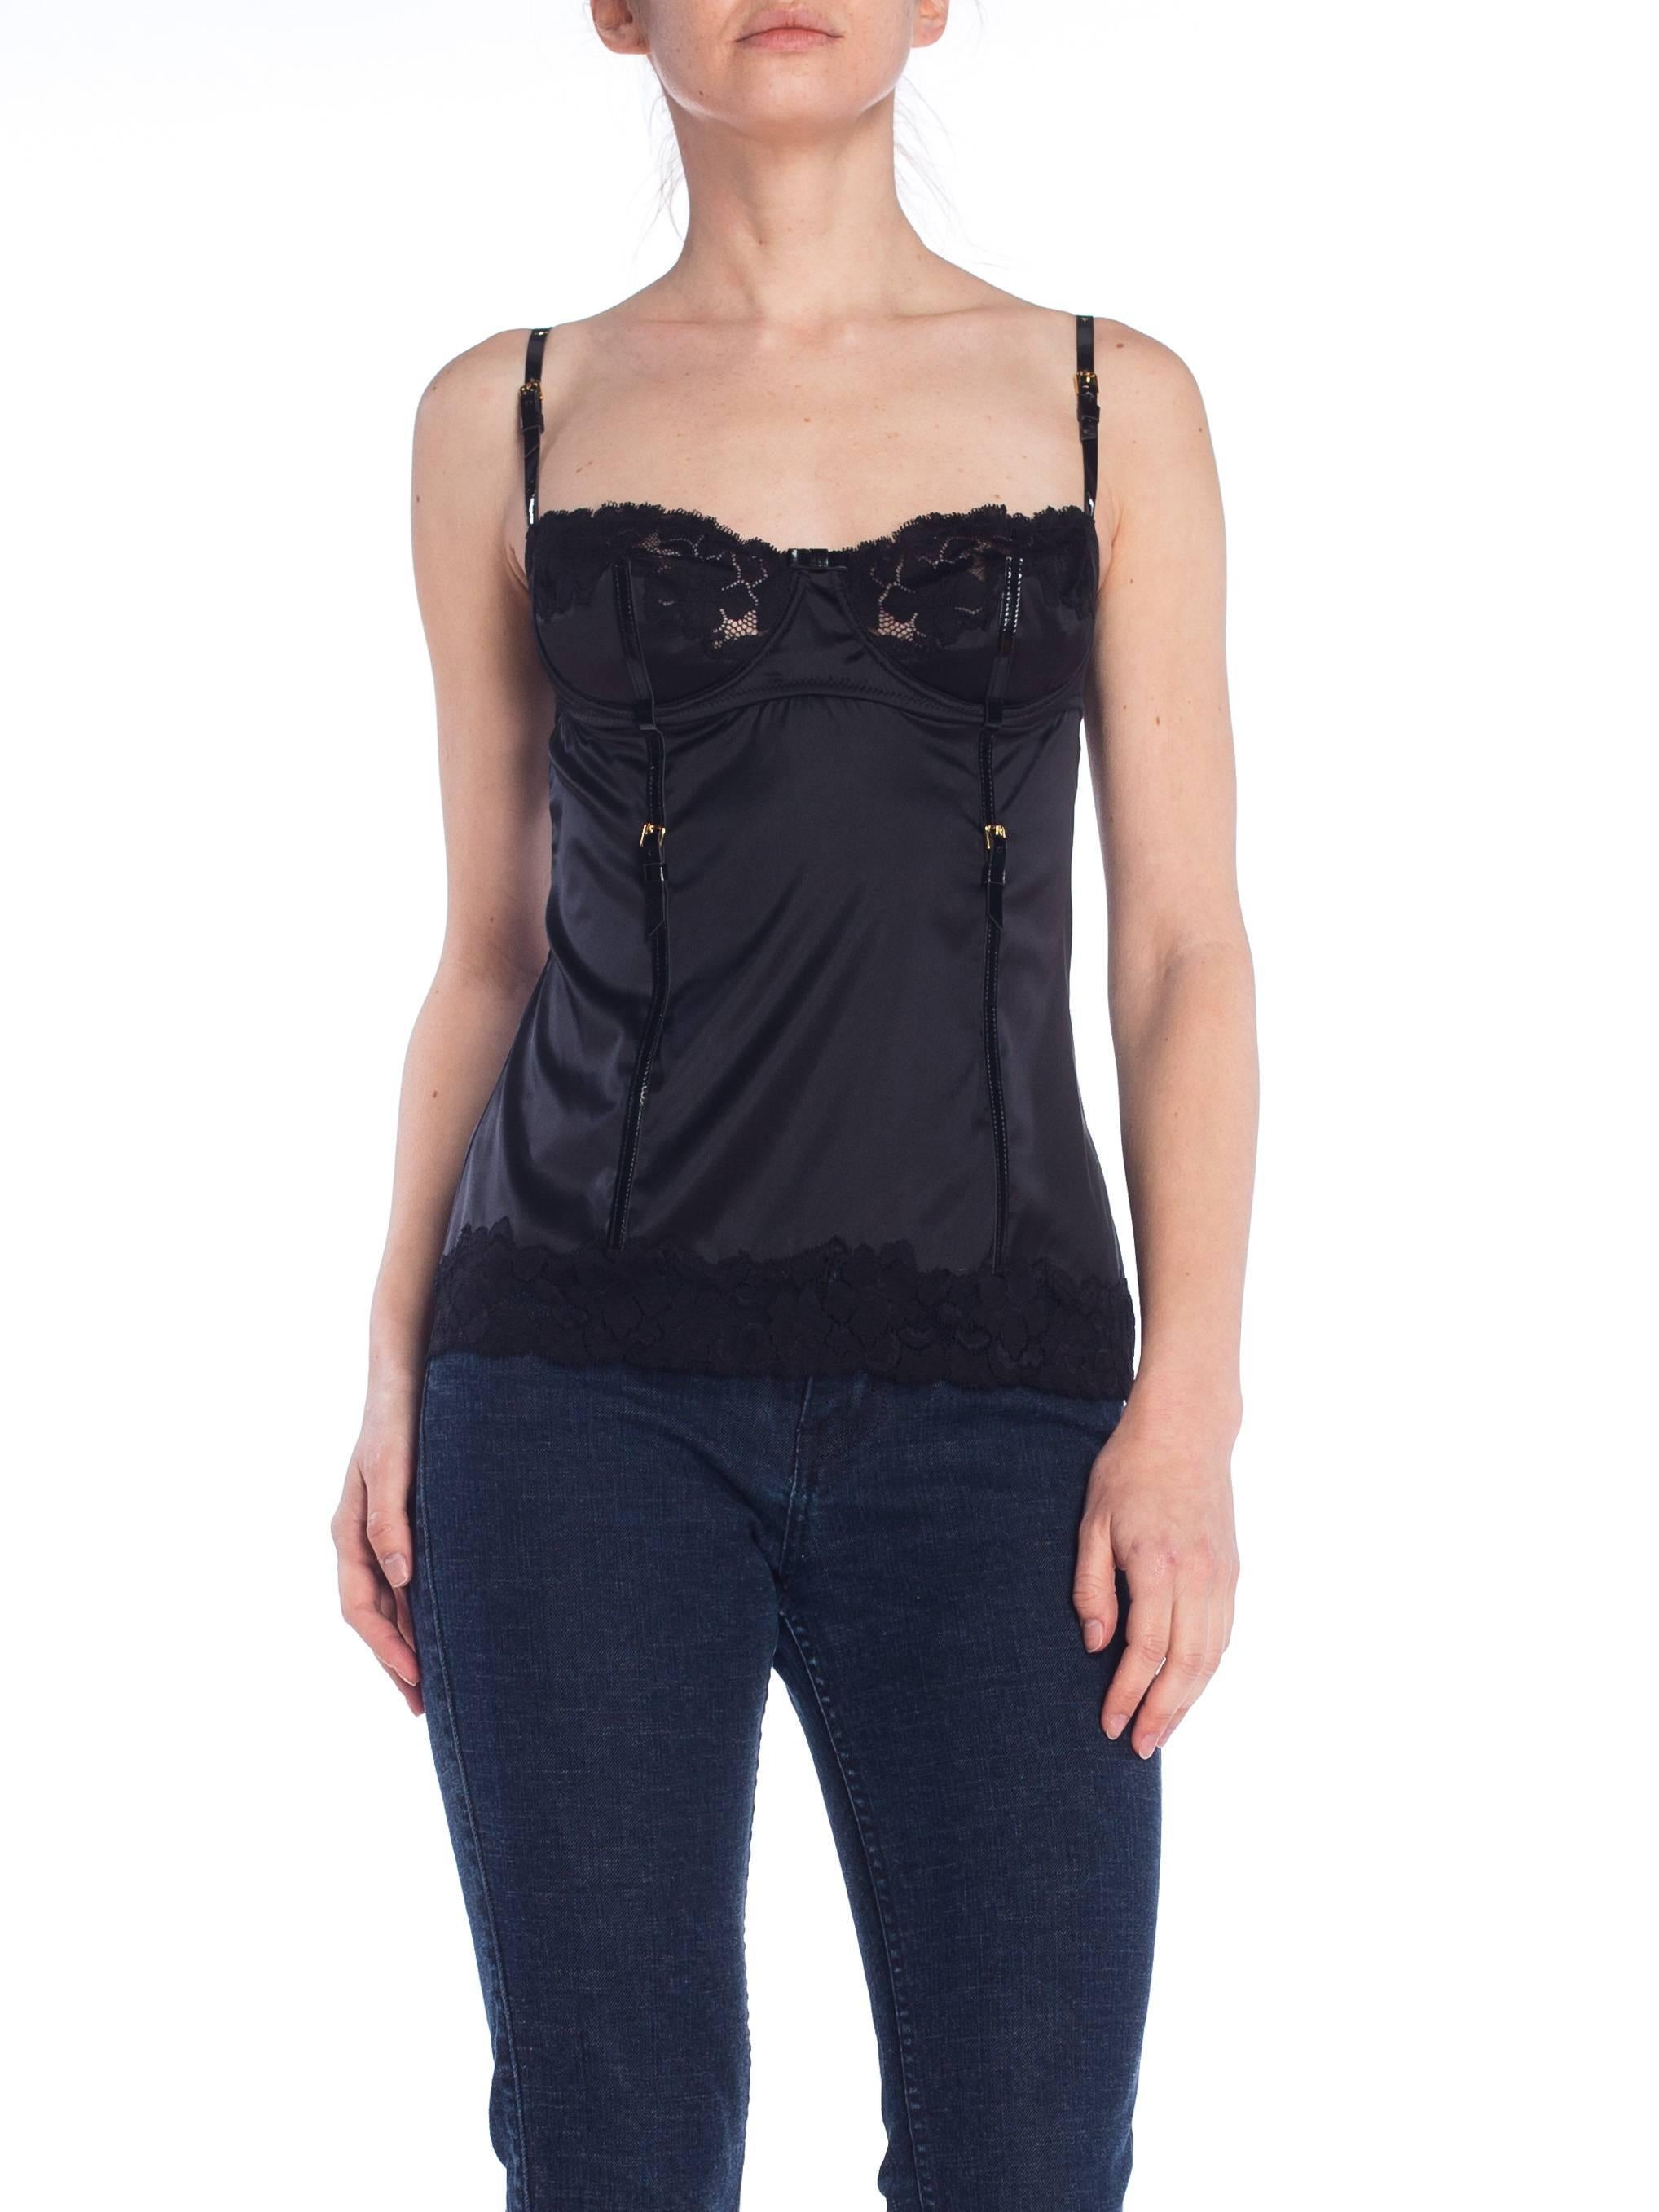 Dolce & Gabbana Silk Cami with Patent Leather & Lace Details